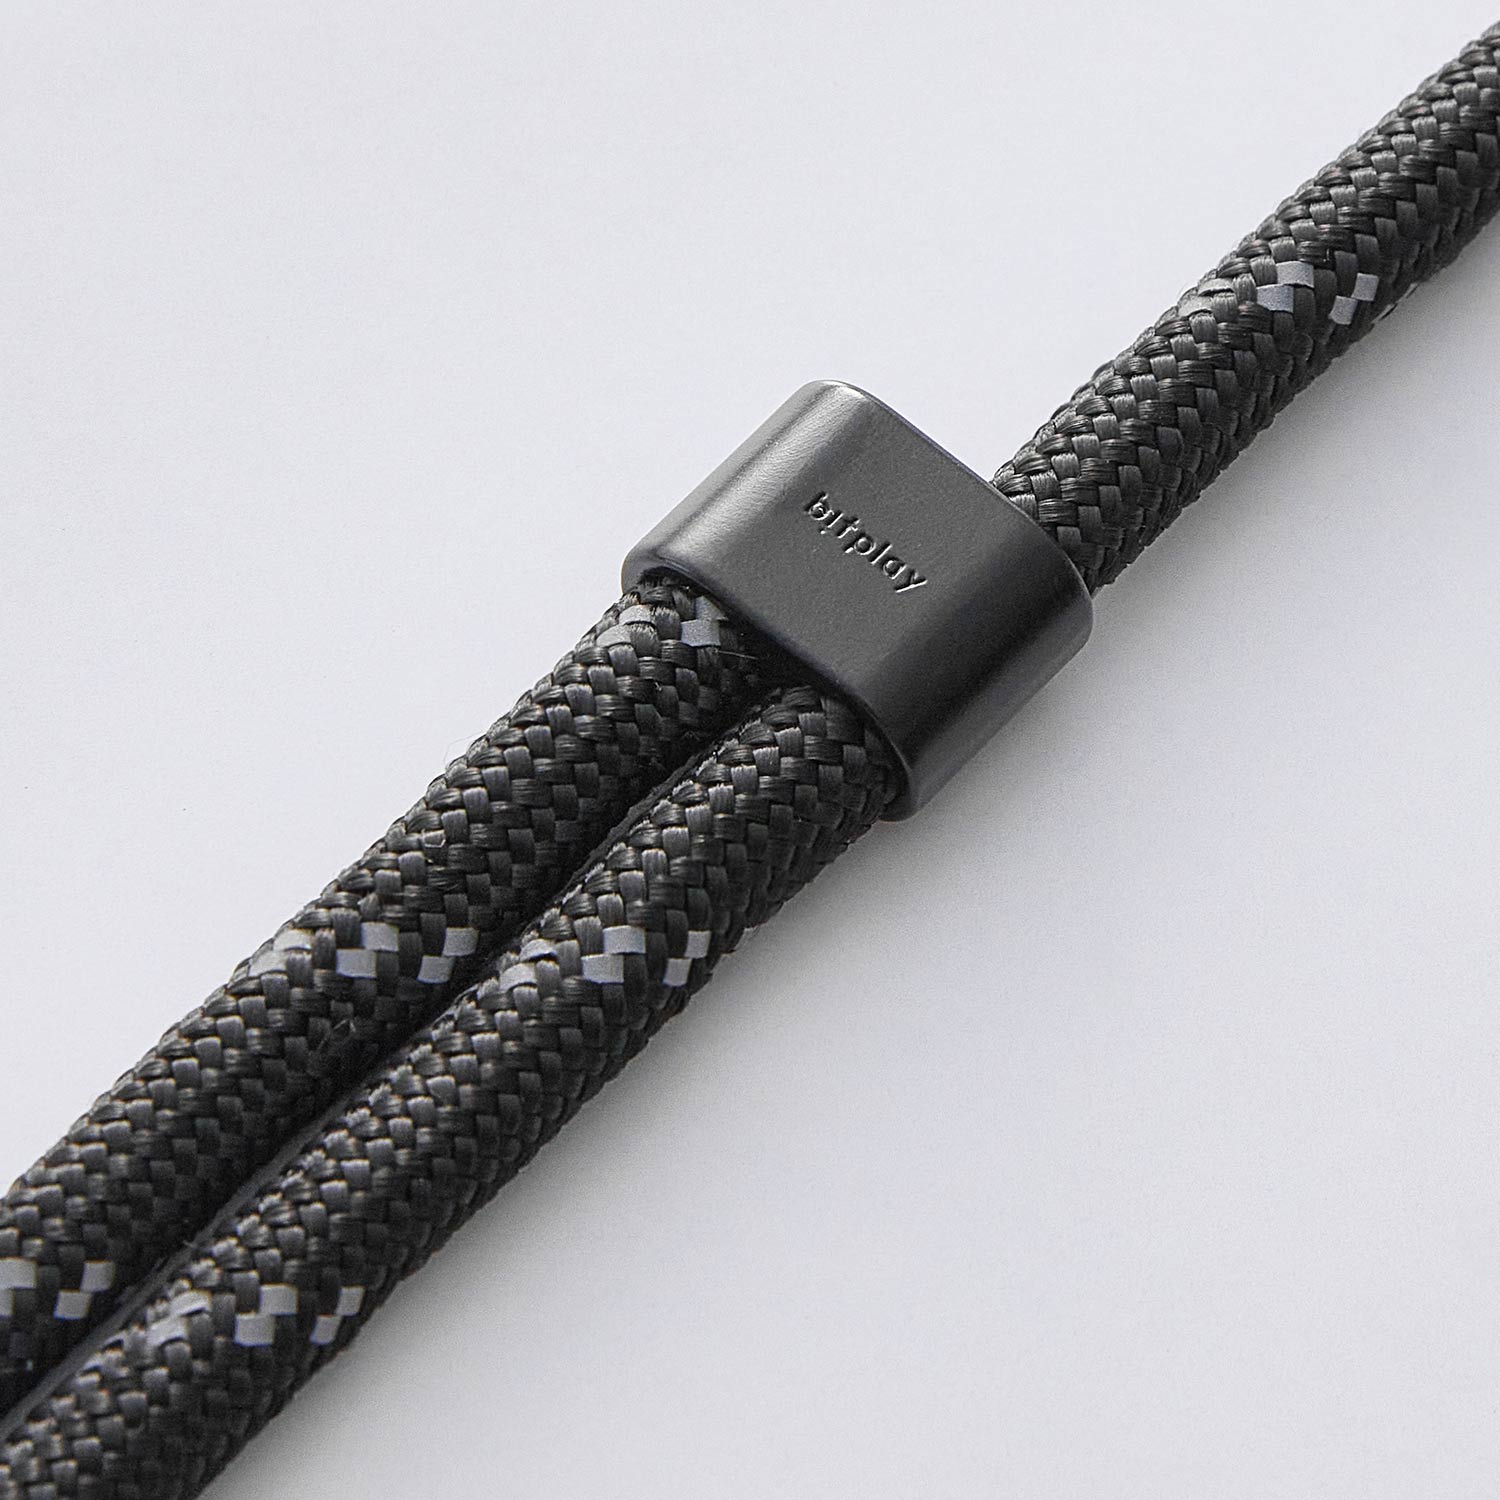 8mm Lite Strap - Black  (Strap Adapter included）